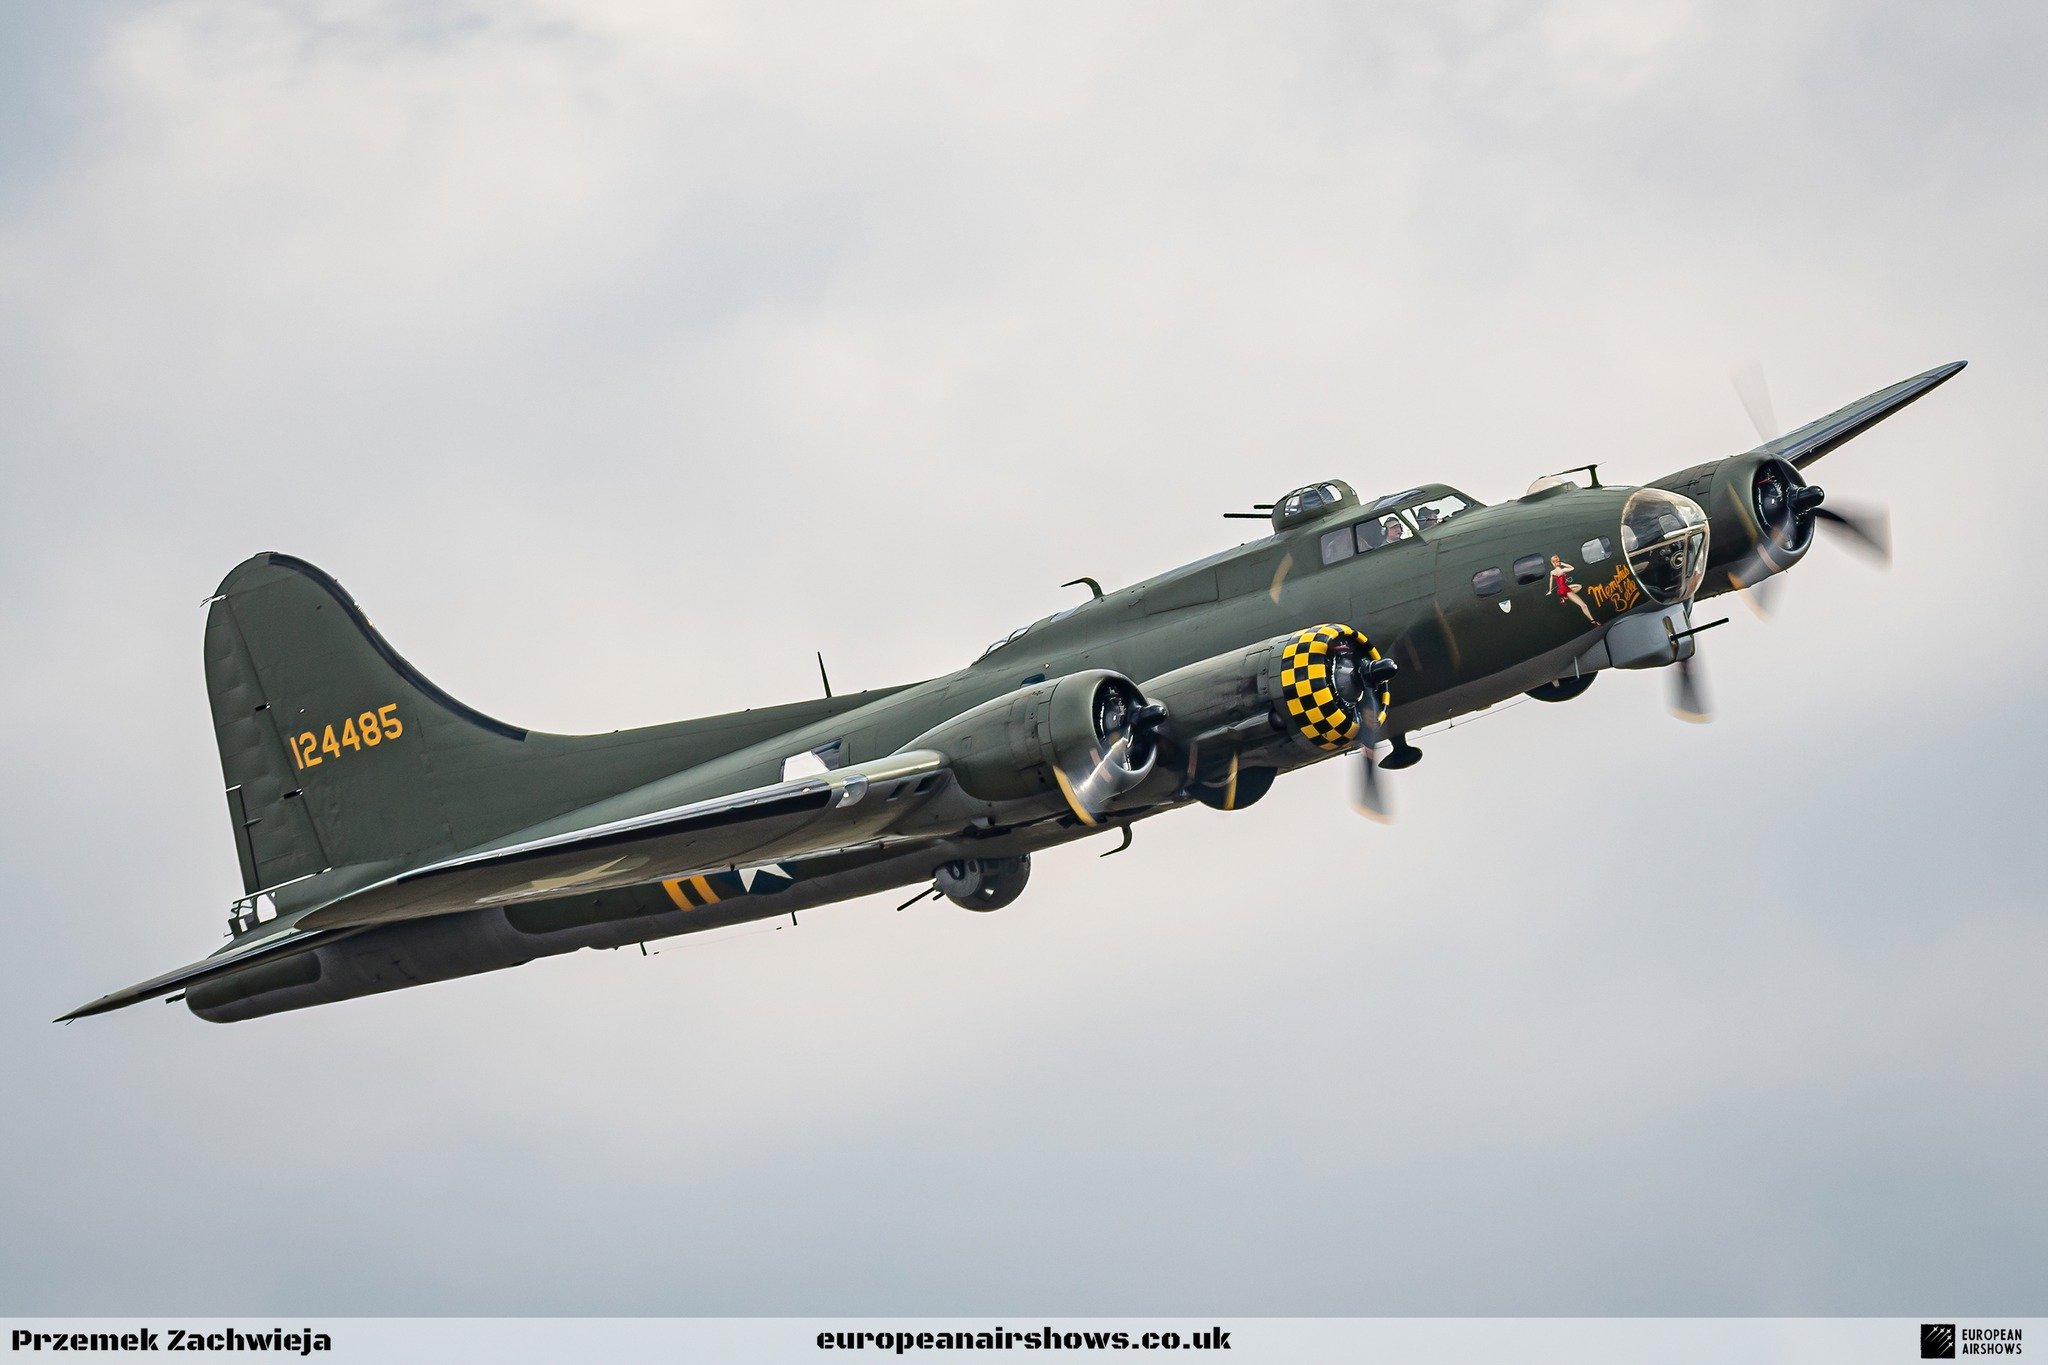 𝐀𝐈𝐑𝐒𝐇𝐎𝐖 𝐍𝐄𝐖𝐒: The eagerly-awaited schedule for 2024 of Sally-B, Europe's only airworthy Boeing B-17G Flying Fortress, has been officially released.

Read more on our website by clicking the link below.

https://www.europeanairshows.co.uk/n